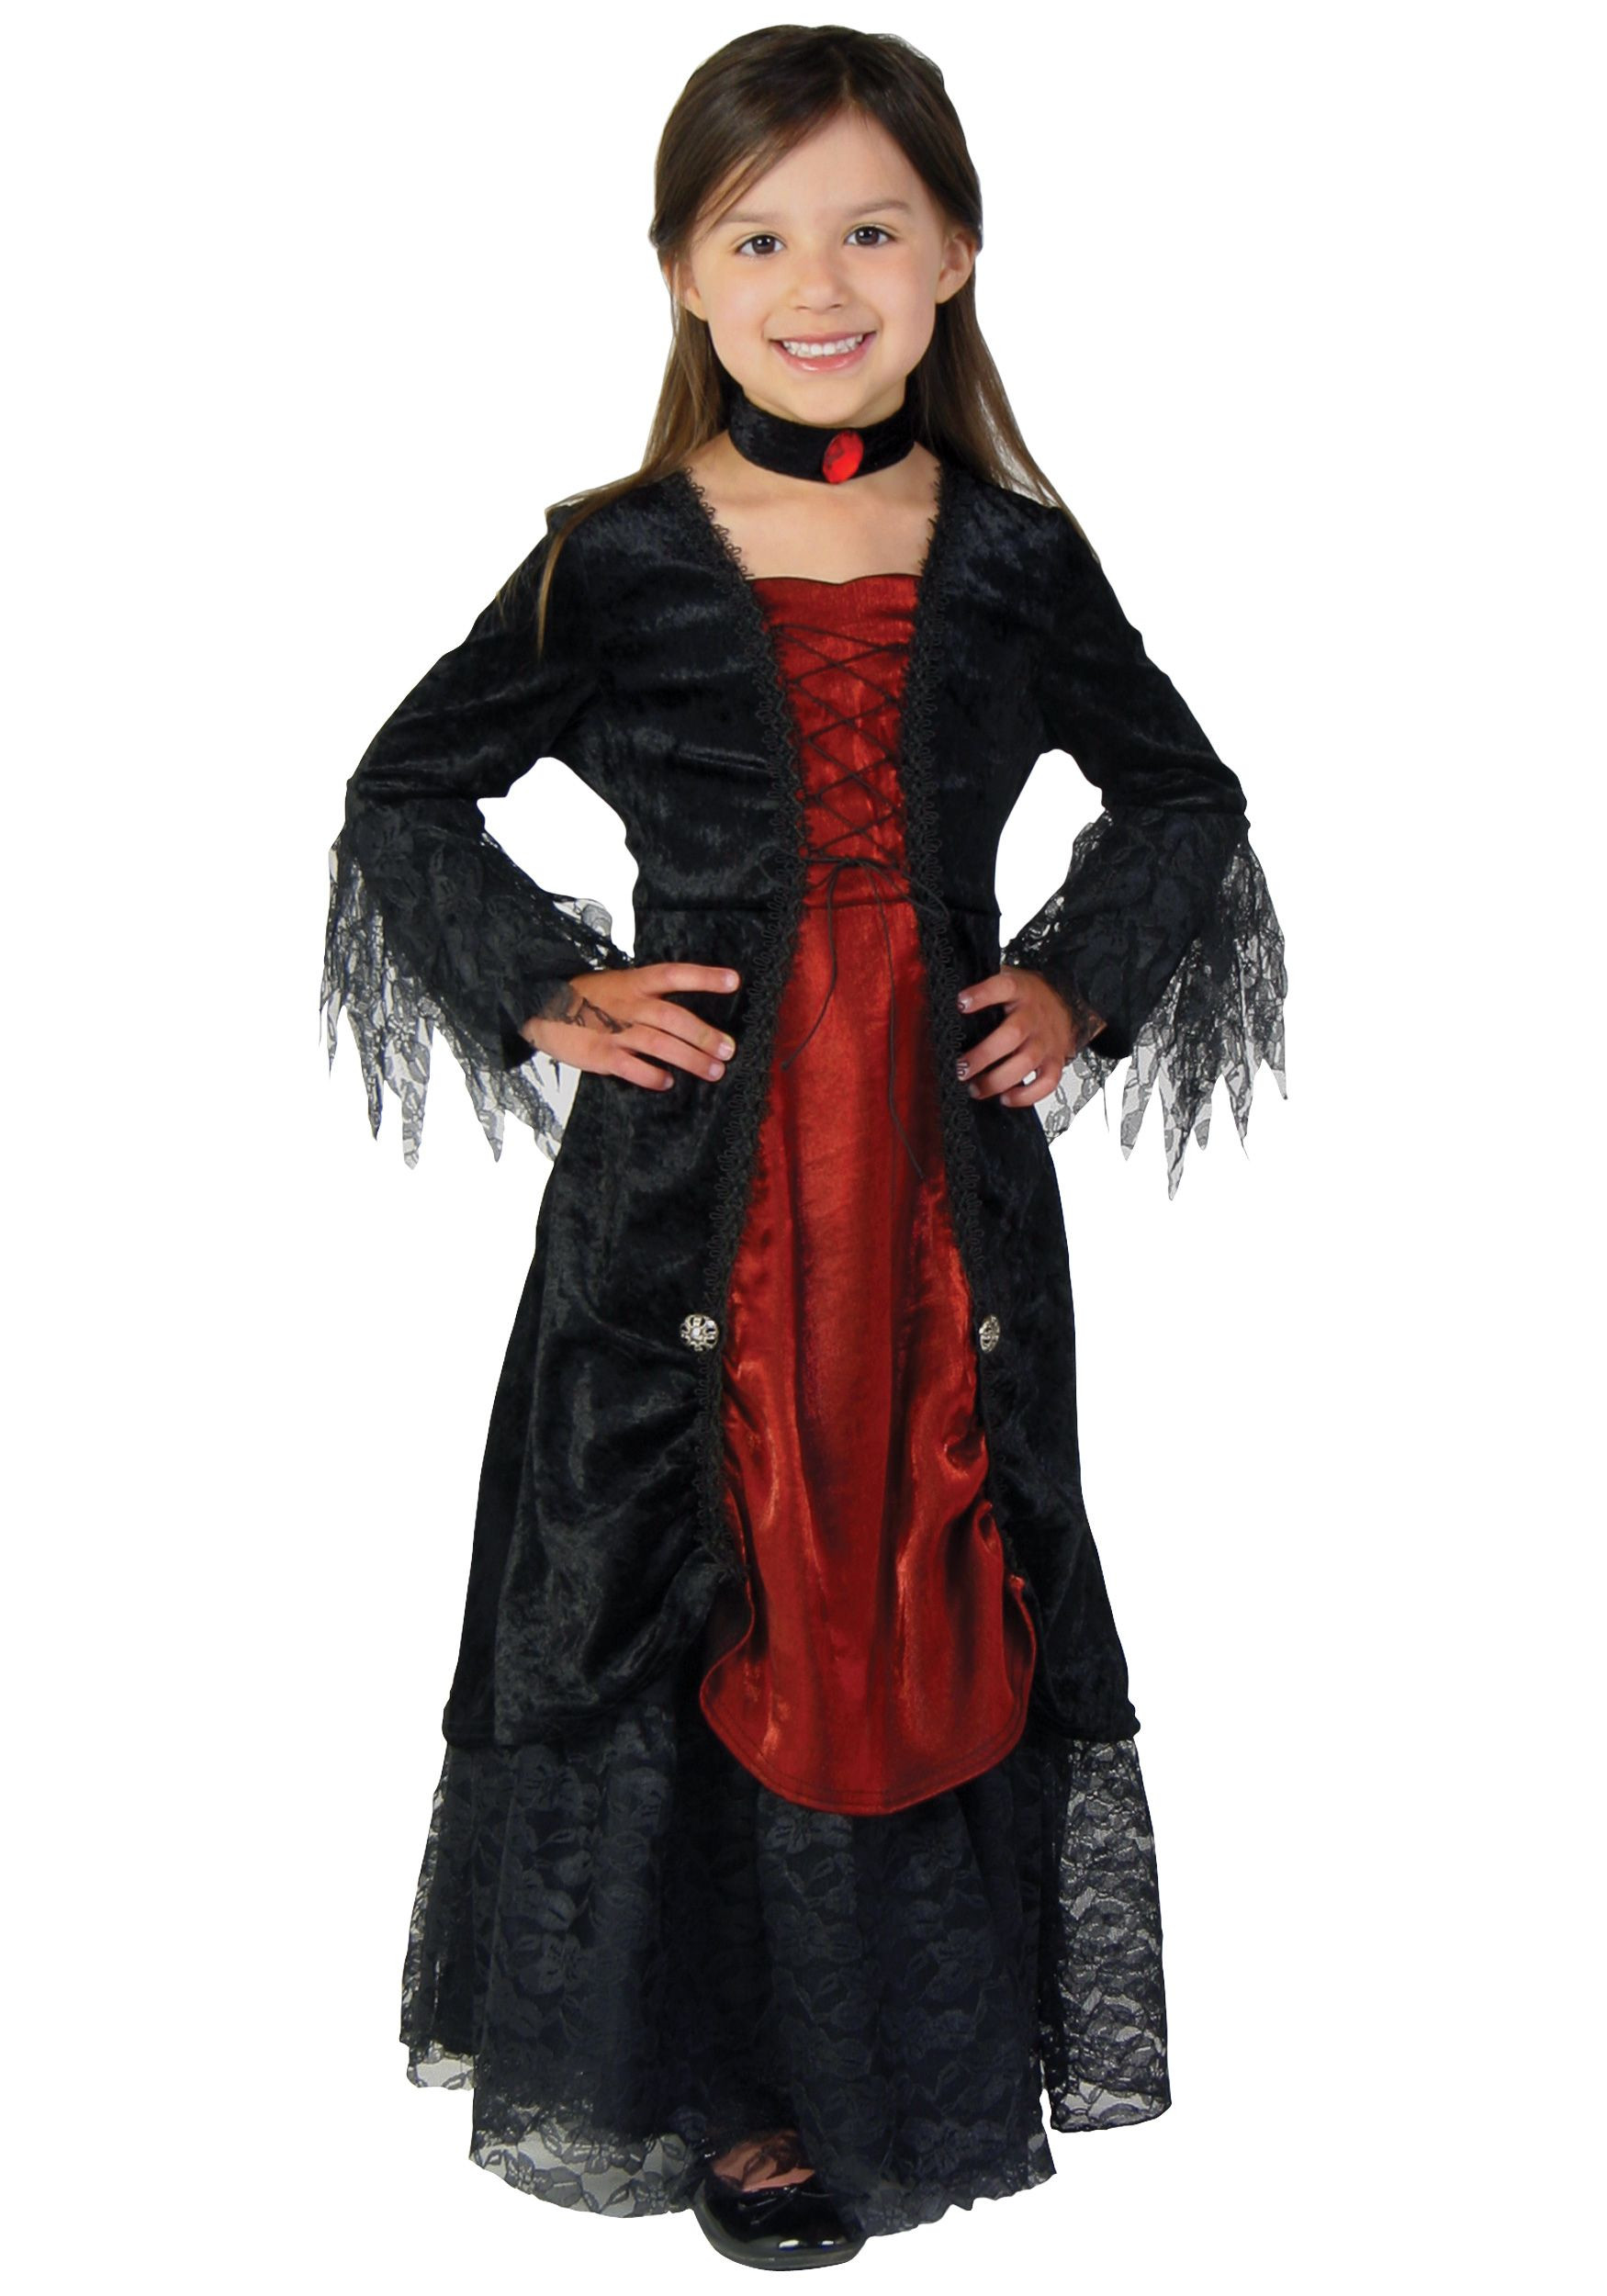 Vampire Halloween Costumes DIY
 A template for my niece Nataleigh who wants to be a